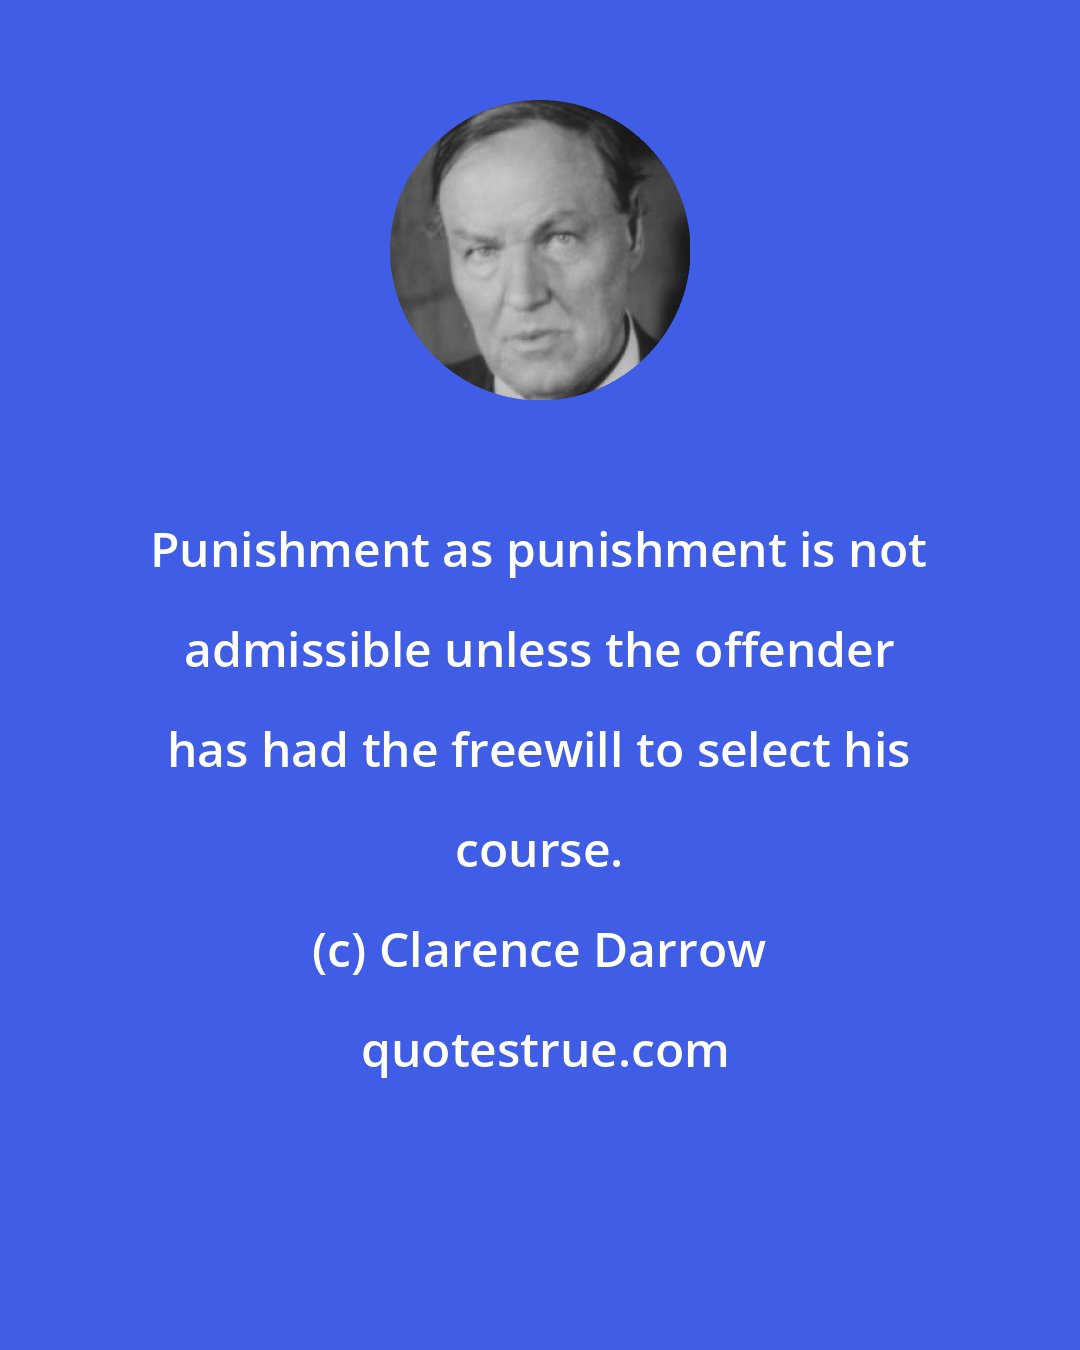 Clarence Darrow: Punishment as punishment is not admissible unless the offender has had the freewill to select his course.